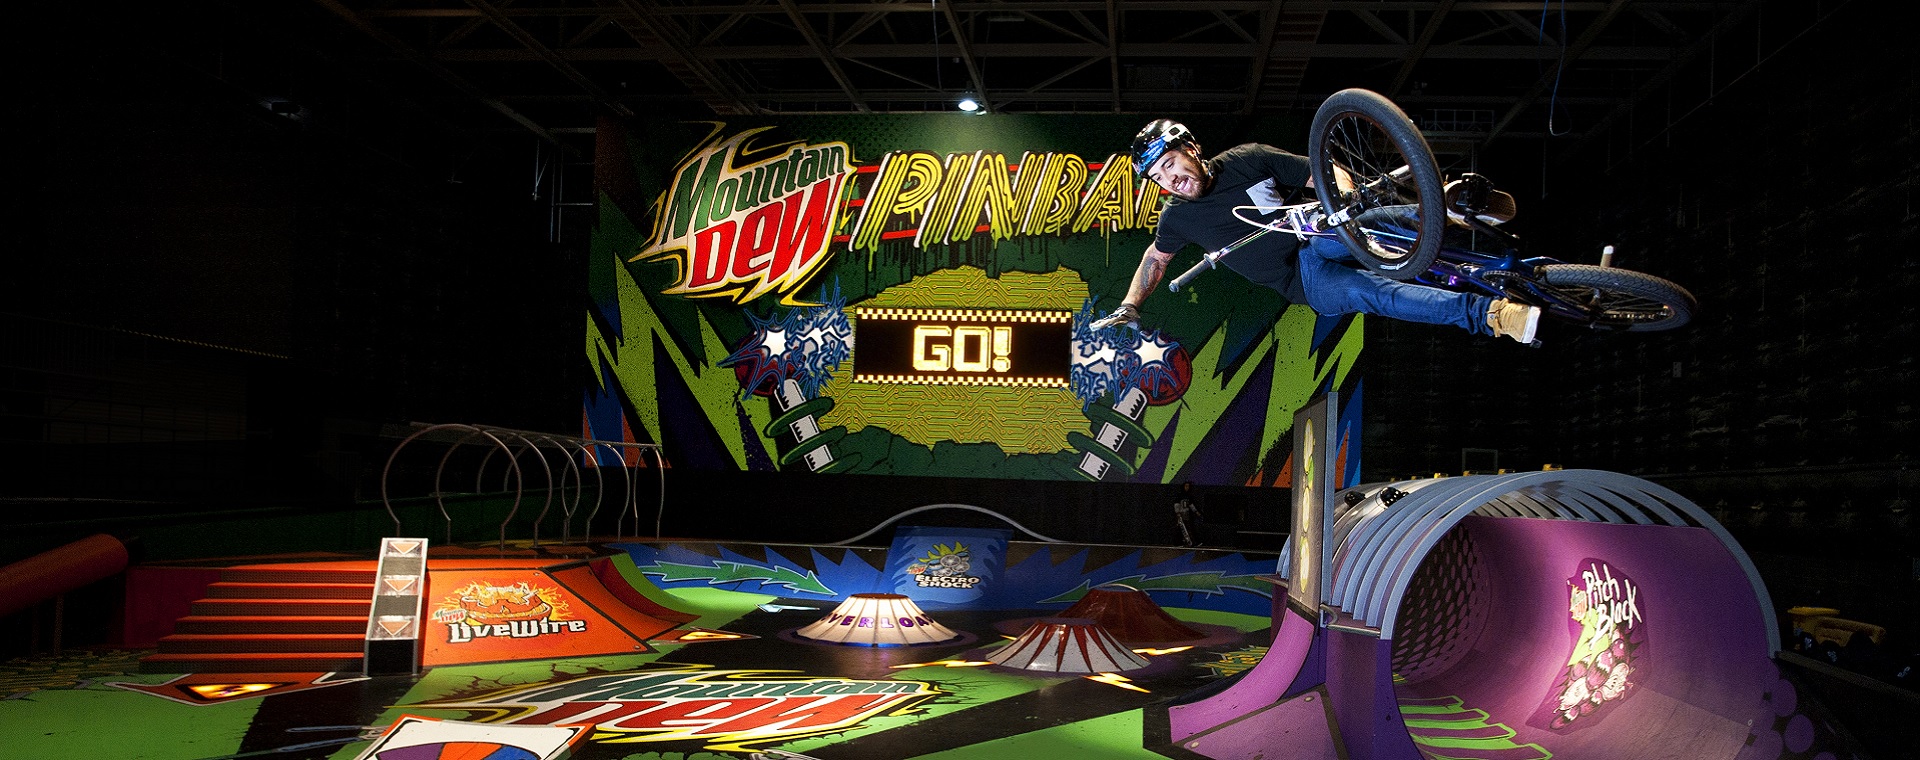 Haimoana Ngata gets air on a BMX at the Mountain Dew Skate Park giant pinball machine in Auckland